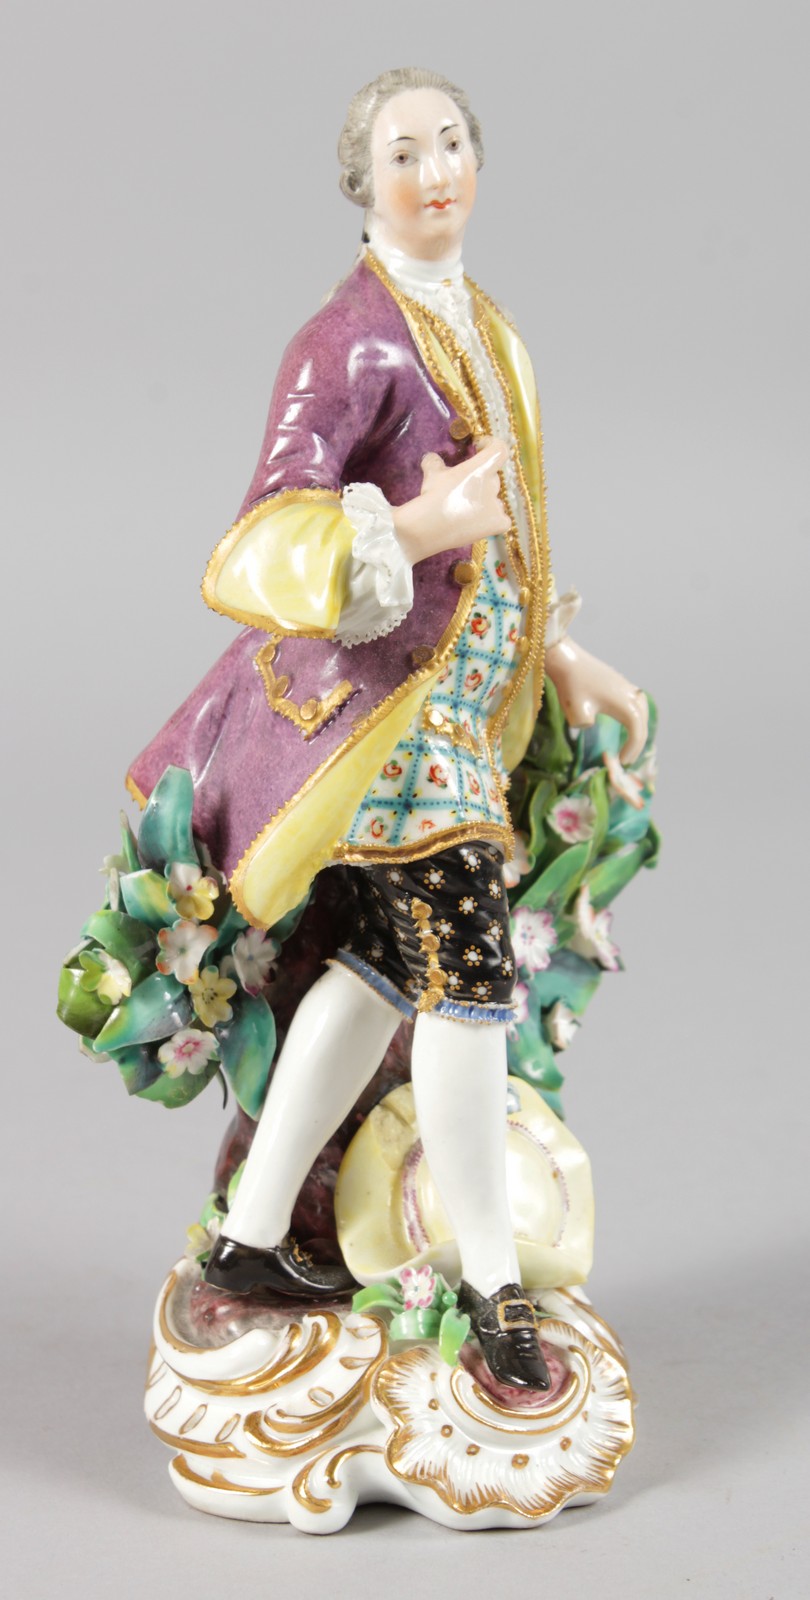 AN EARLY 19TH CENTURY FINE DERBY FIGURE OF A GALLANT standing beside a flowering plant in formal